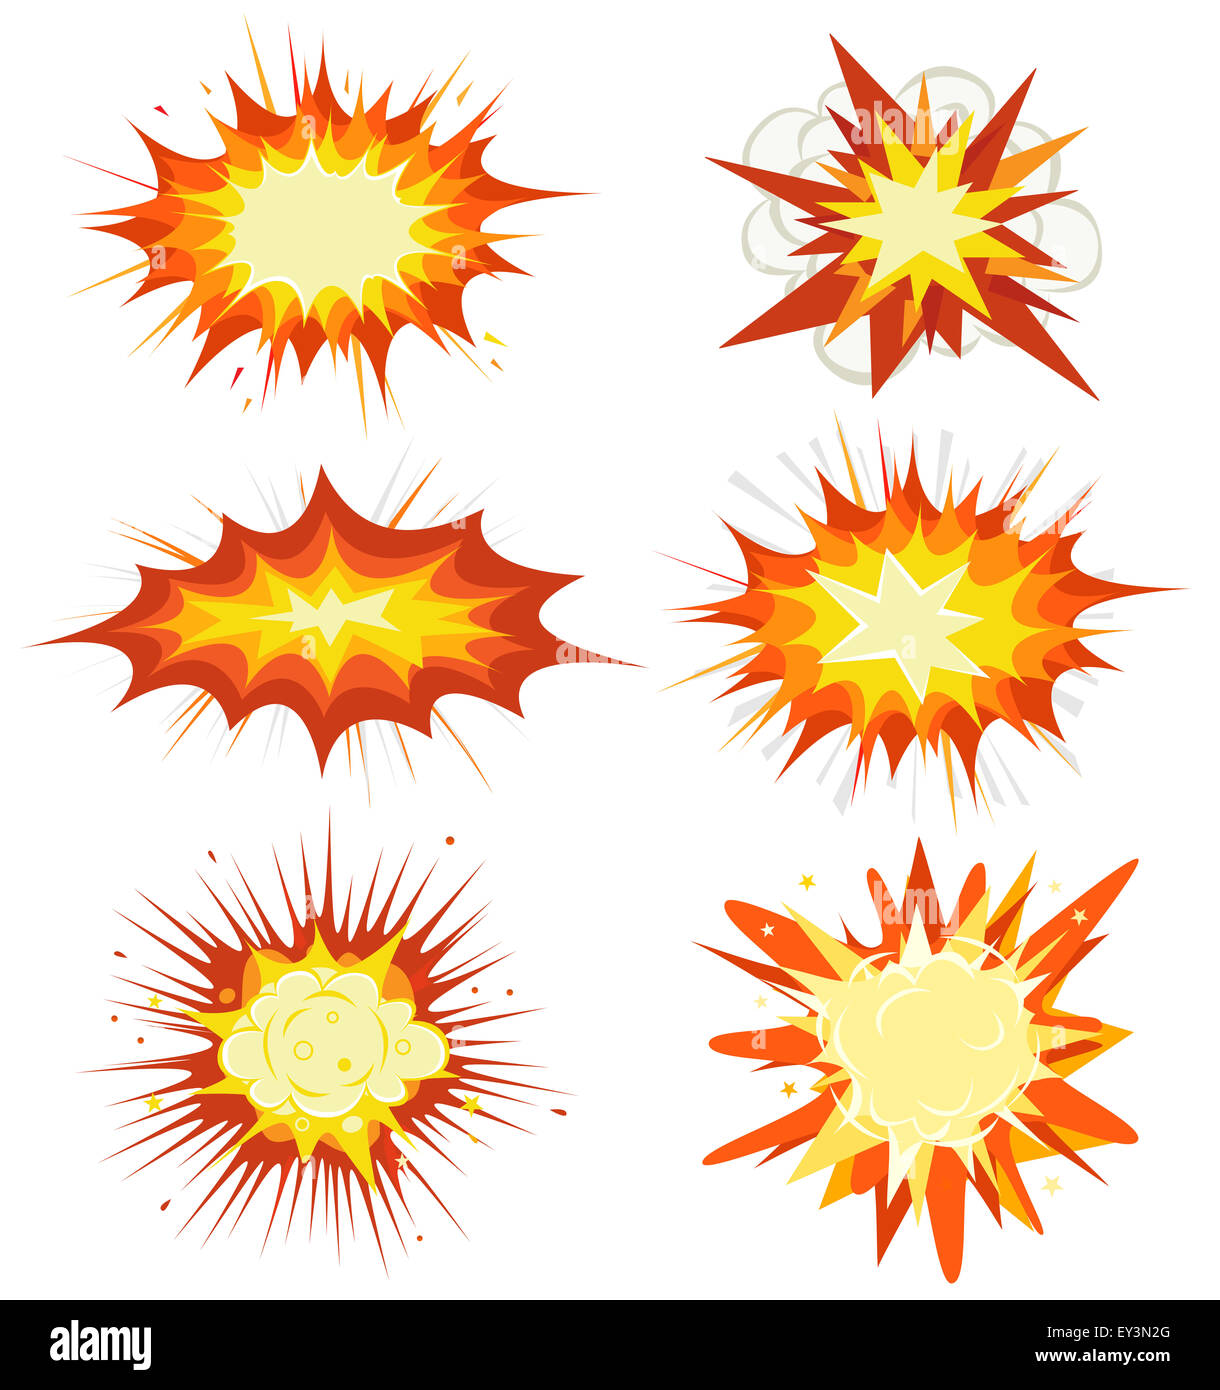 Illustration of a set of comic book explosion, blast and other cartoon fire bomb, bang and exploding symbols Stock Photo